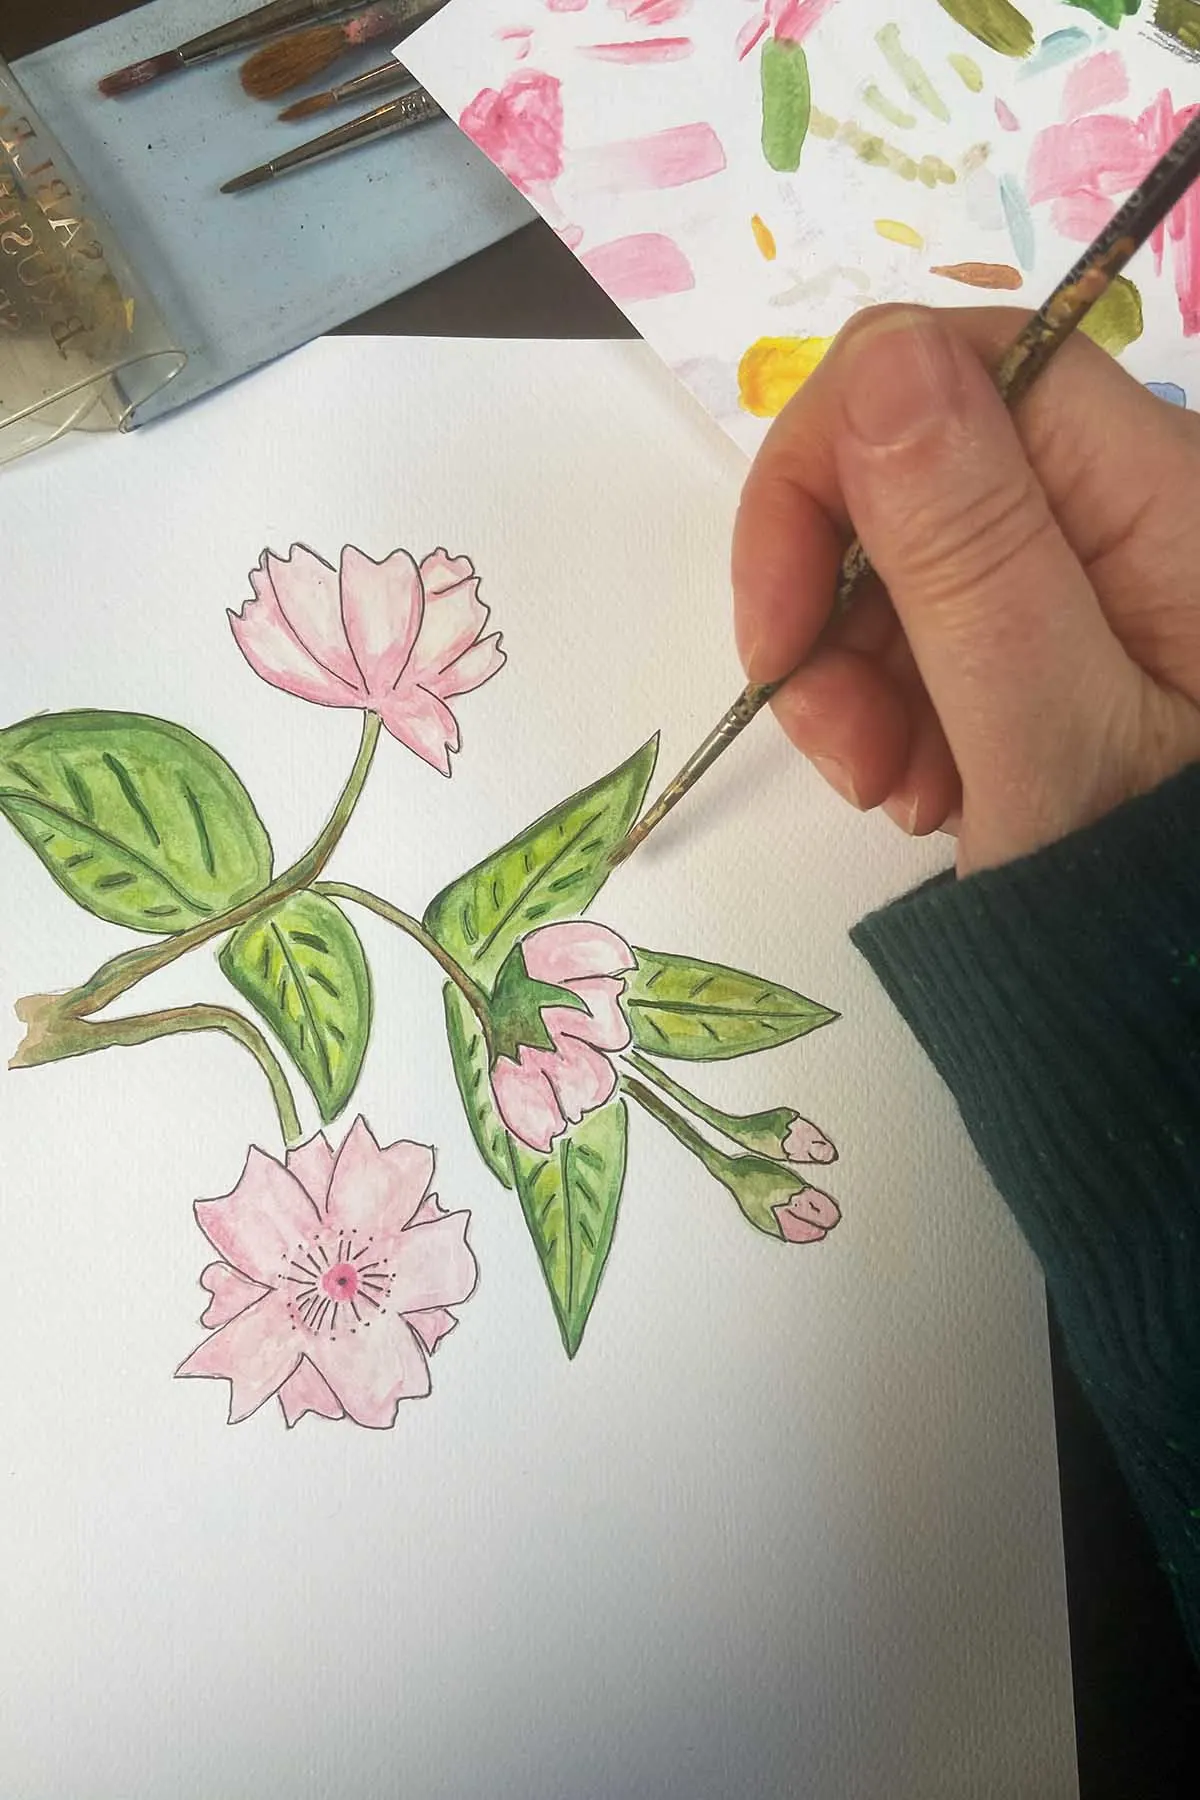 Painting the cherry blossom with watercolour paint